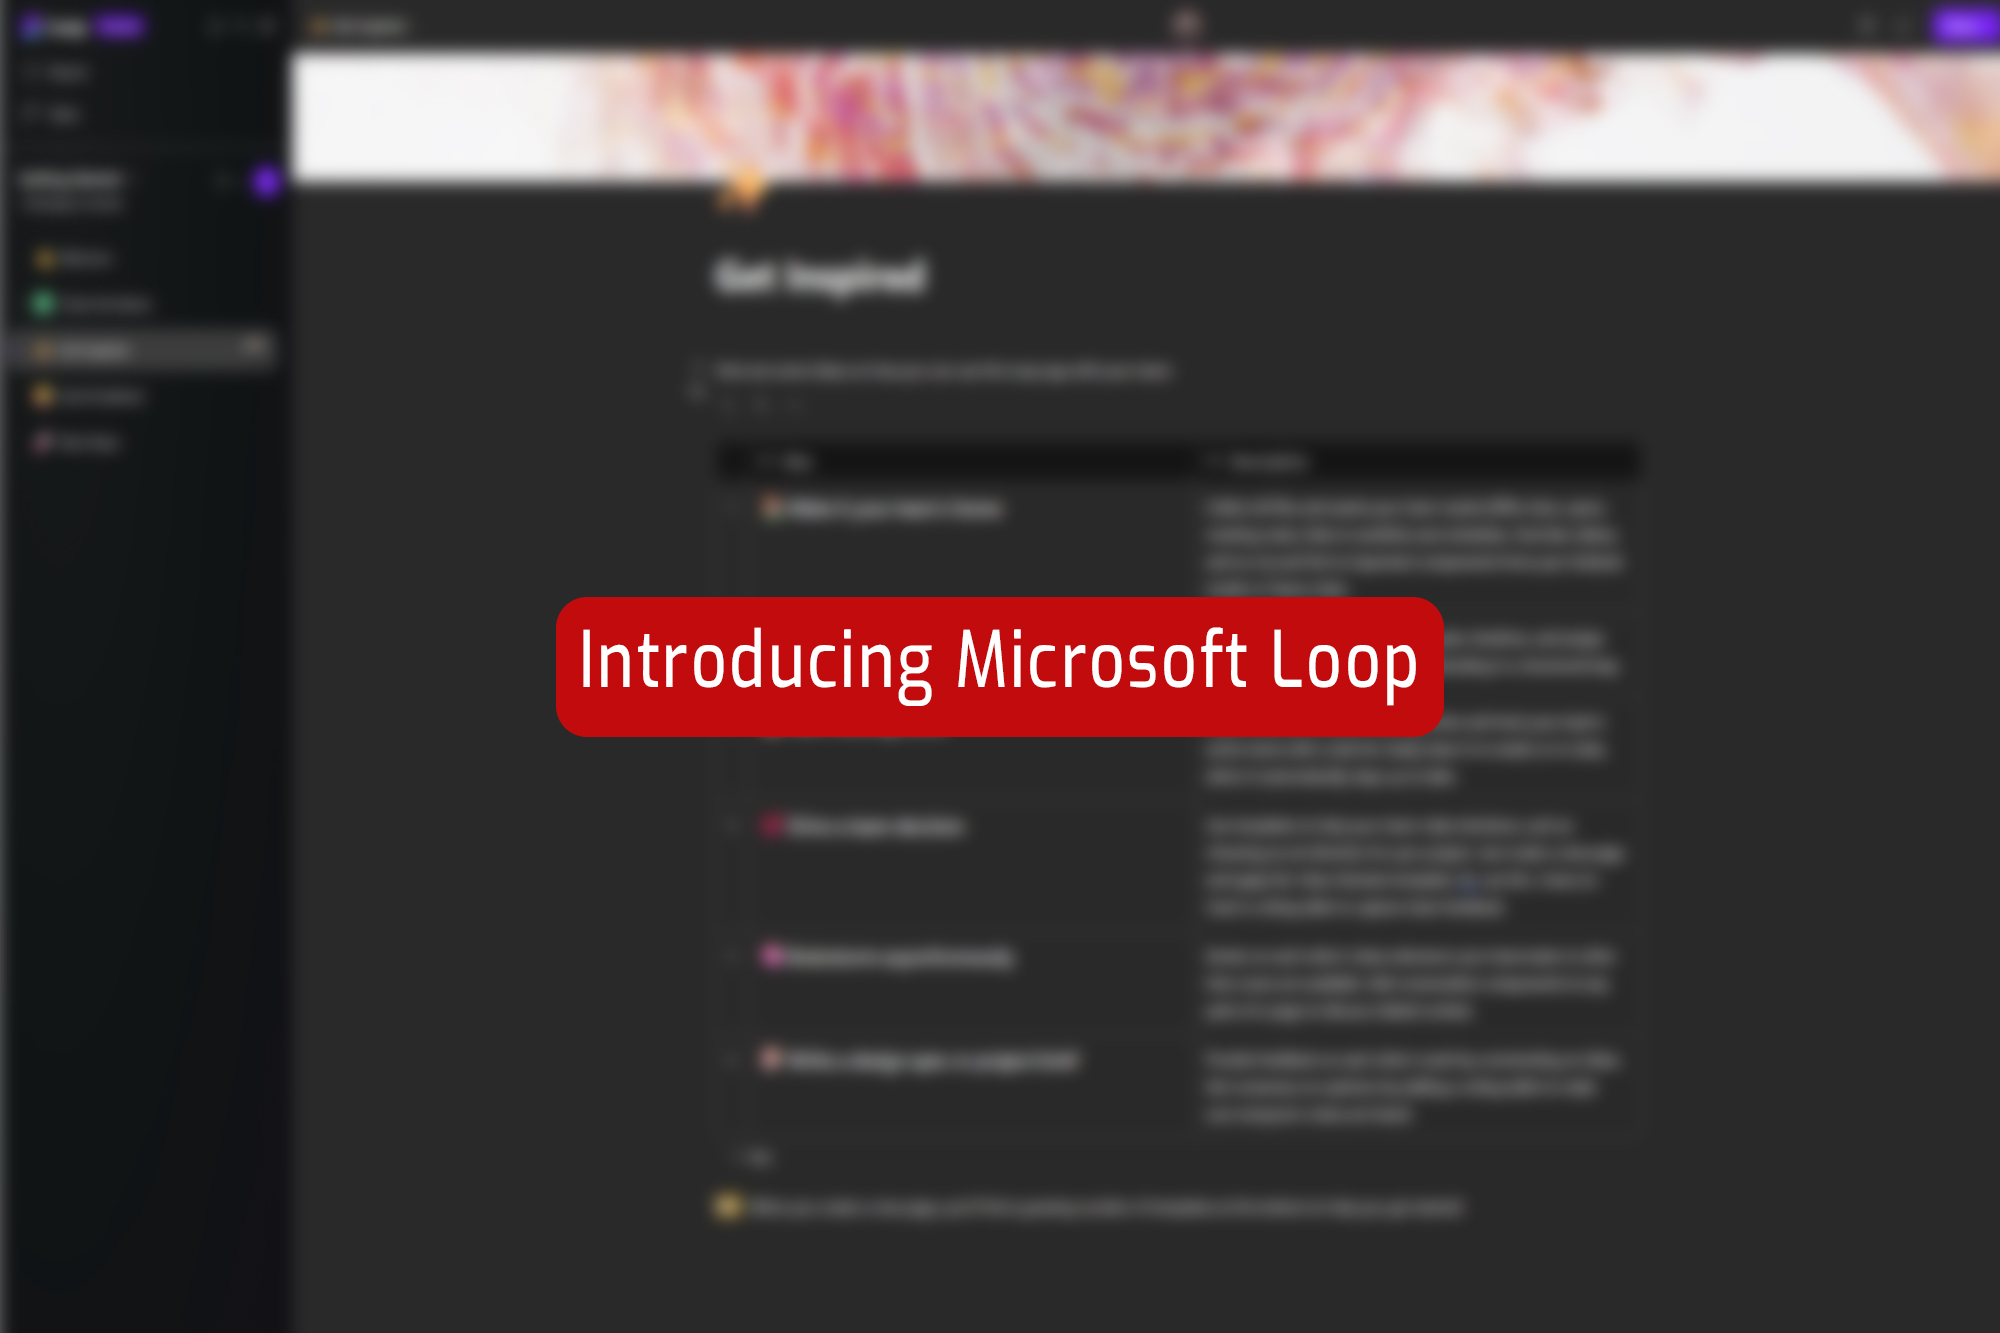 A Microsoft Loop workpage, blurred behind the caption "Introducing Microsoft Loop" in a red box with rounded corners.